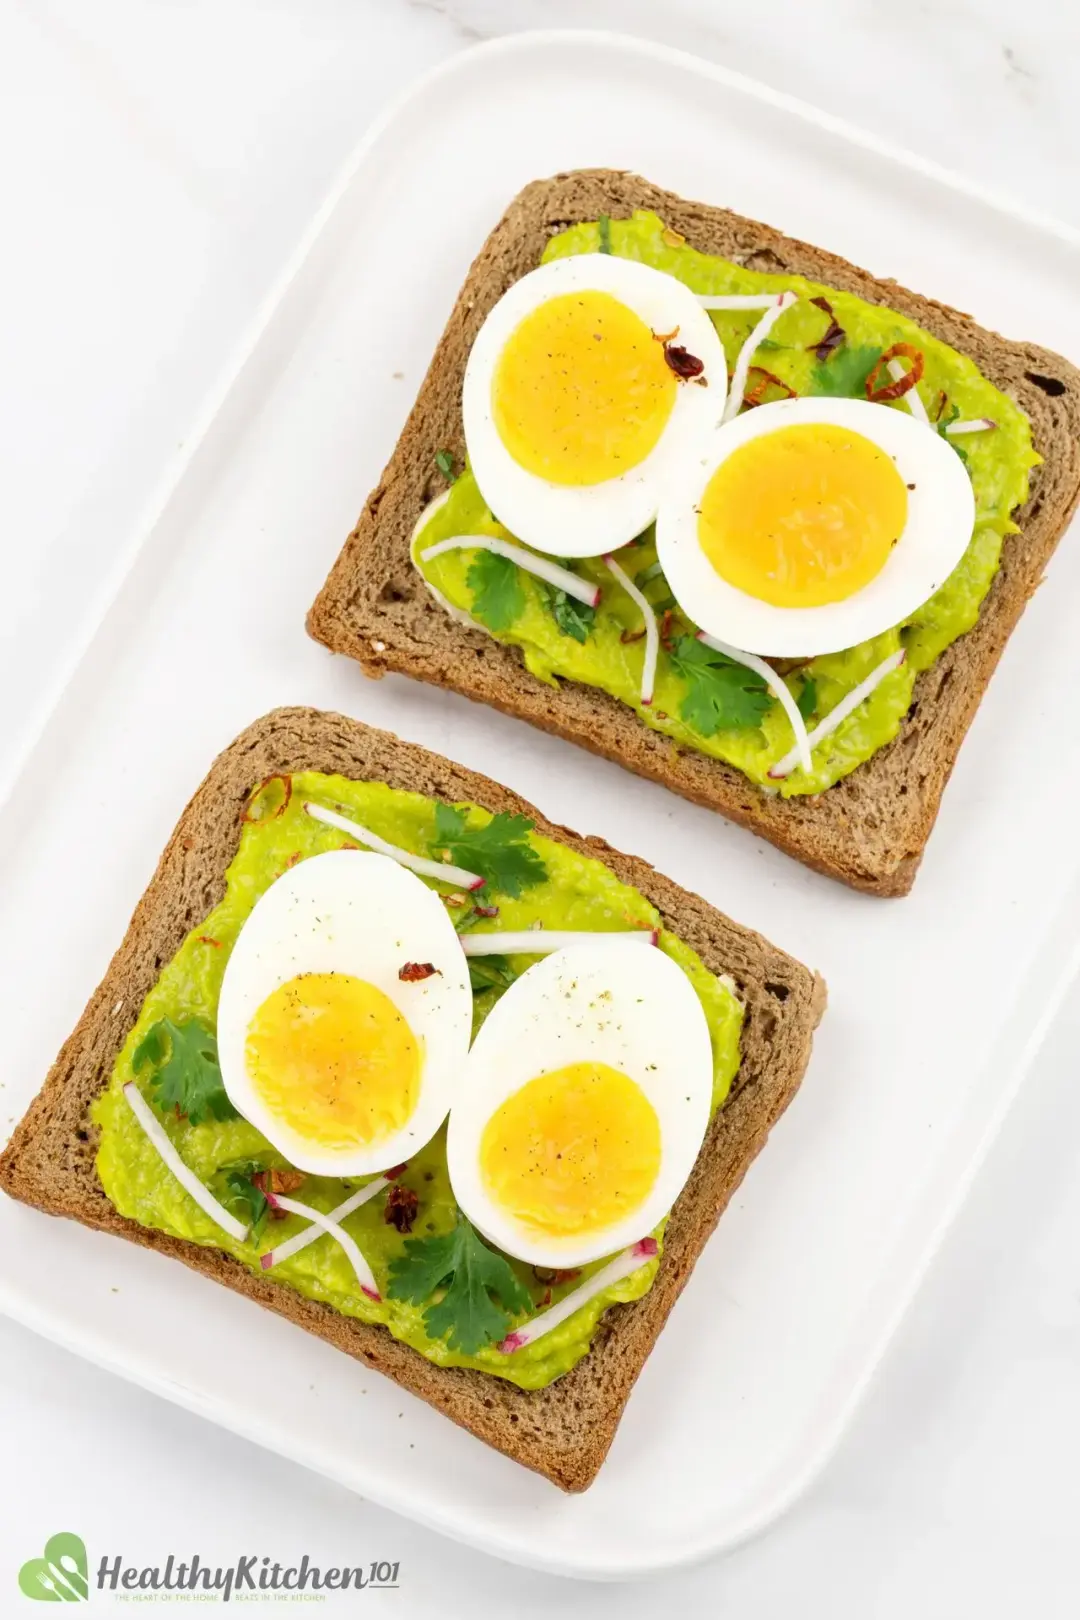 Two slices of brown toast topped with avocado smear, boiled egg slices, cilantro sprigs, and other garnishes